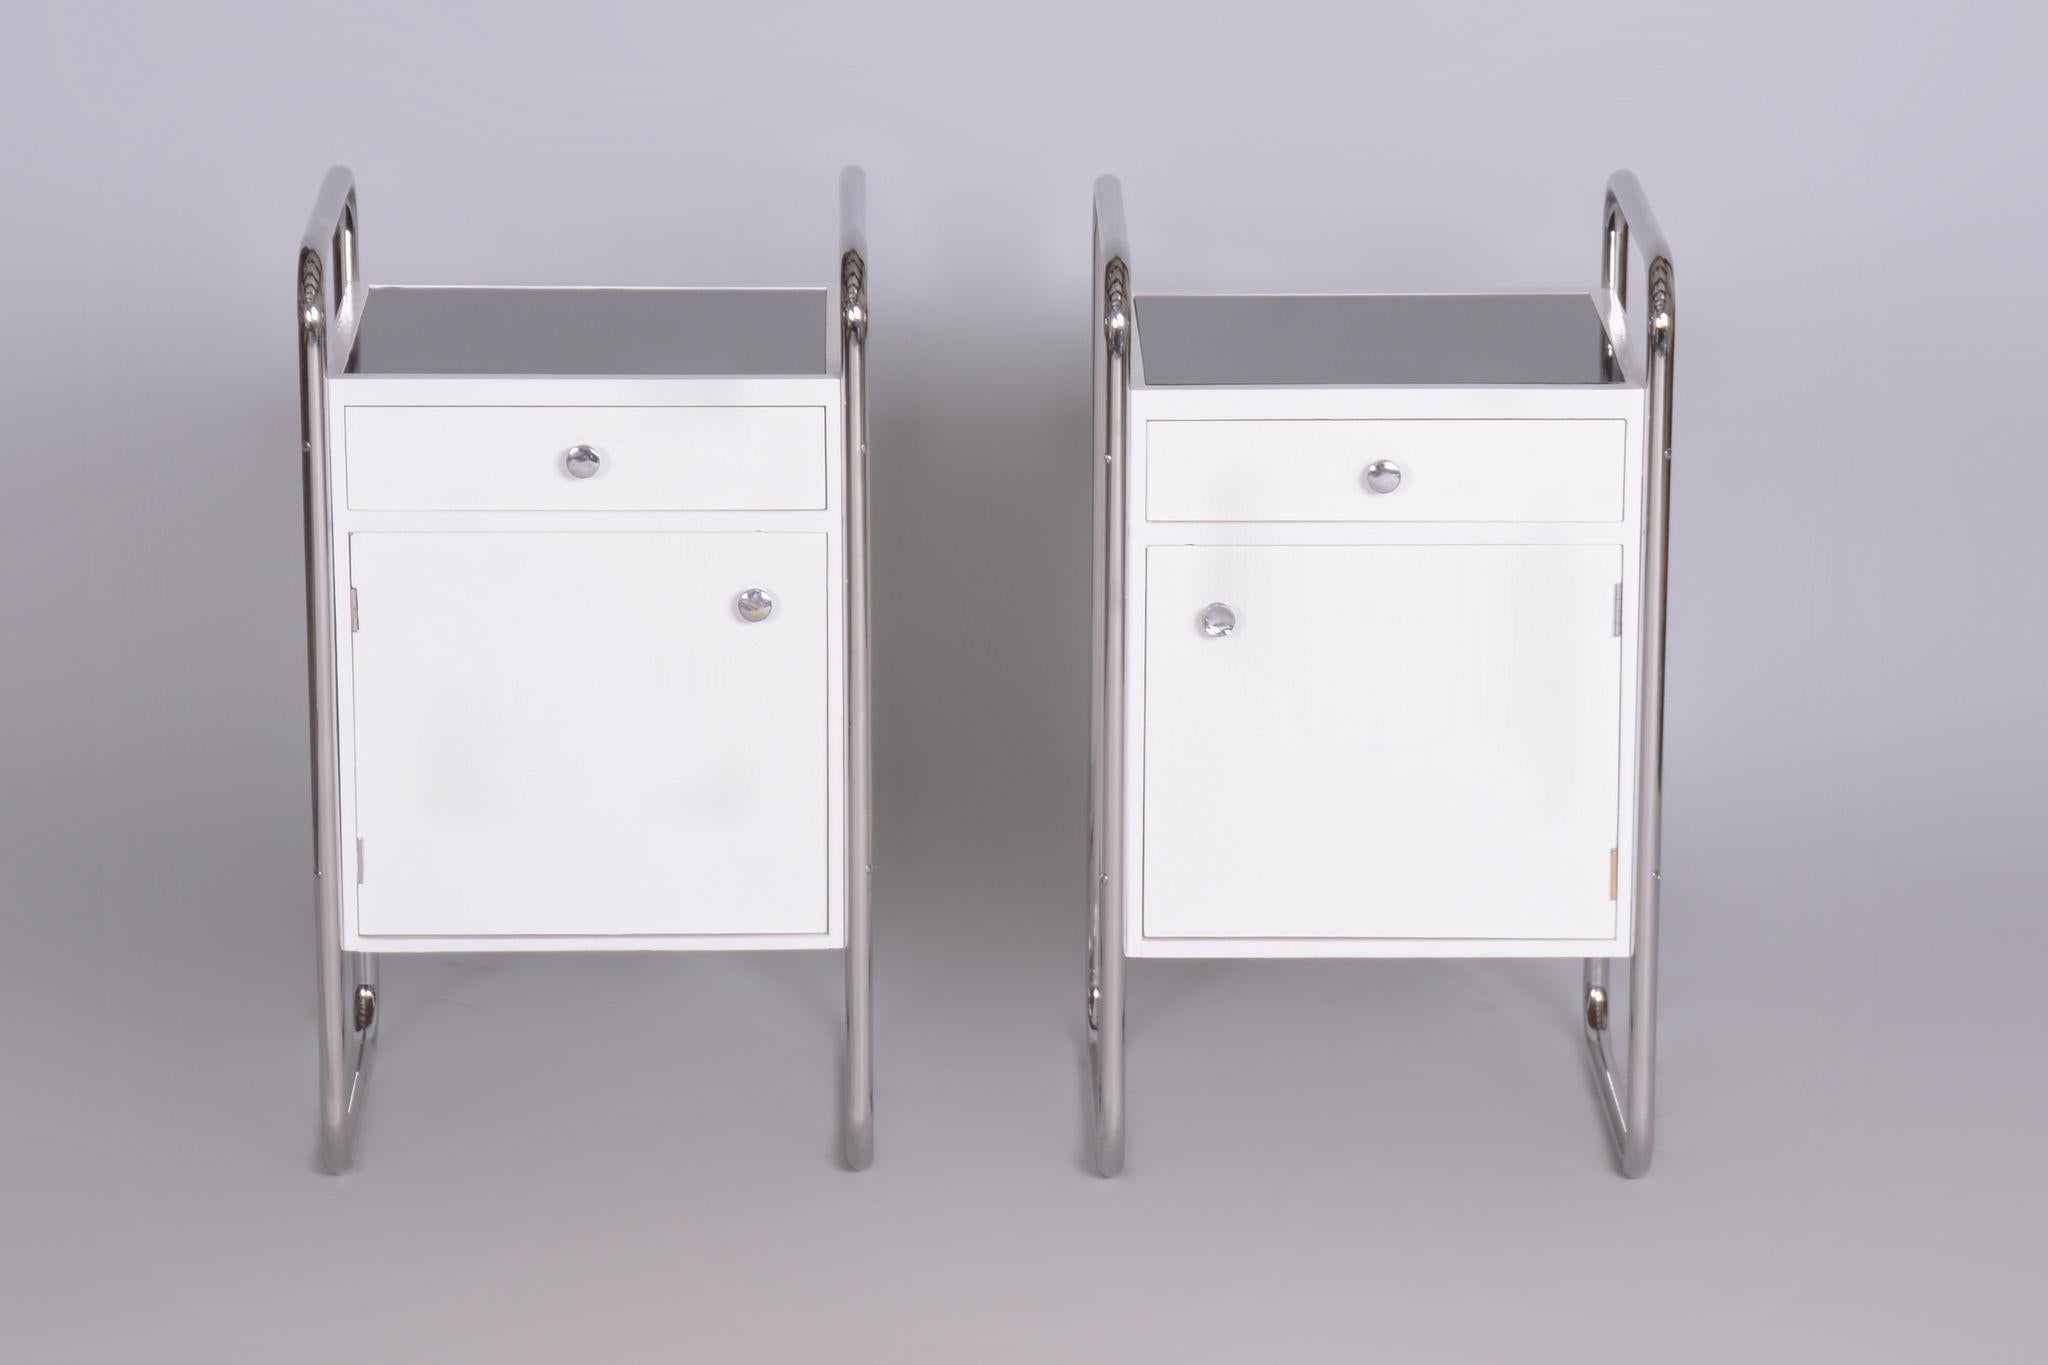 Restored Bauhaus Pair of Bedside Tables, Vichr a spol, Chrome, Czechia, 1930s For Sale 2